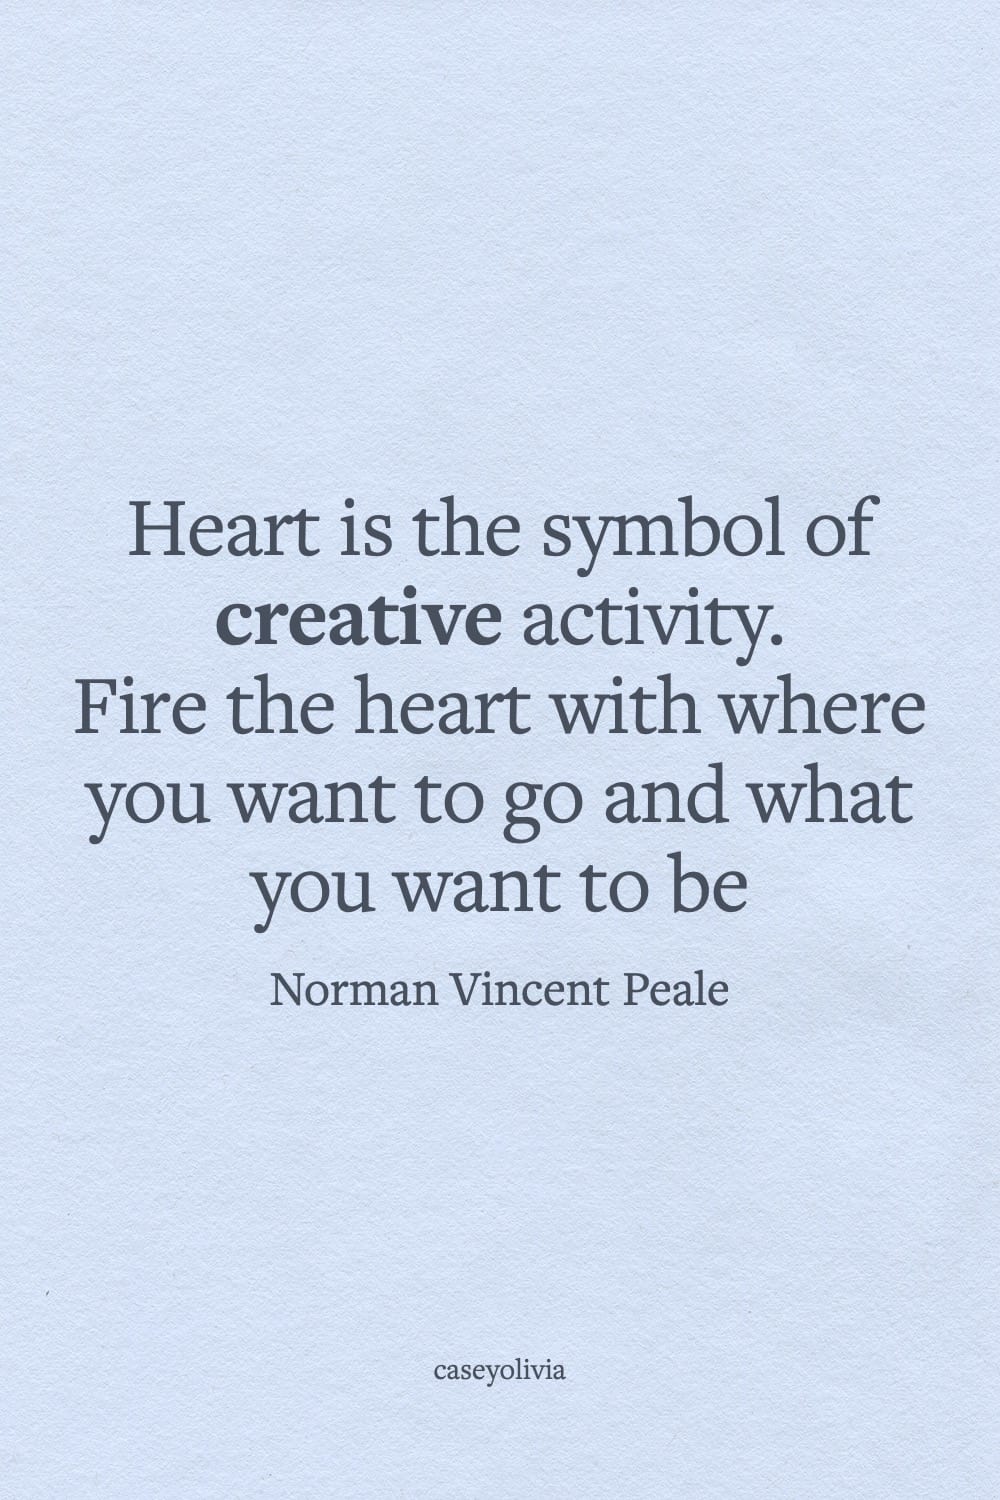 heart is the symbol of creative activity saying